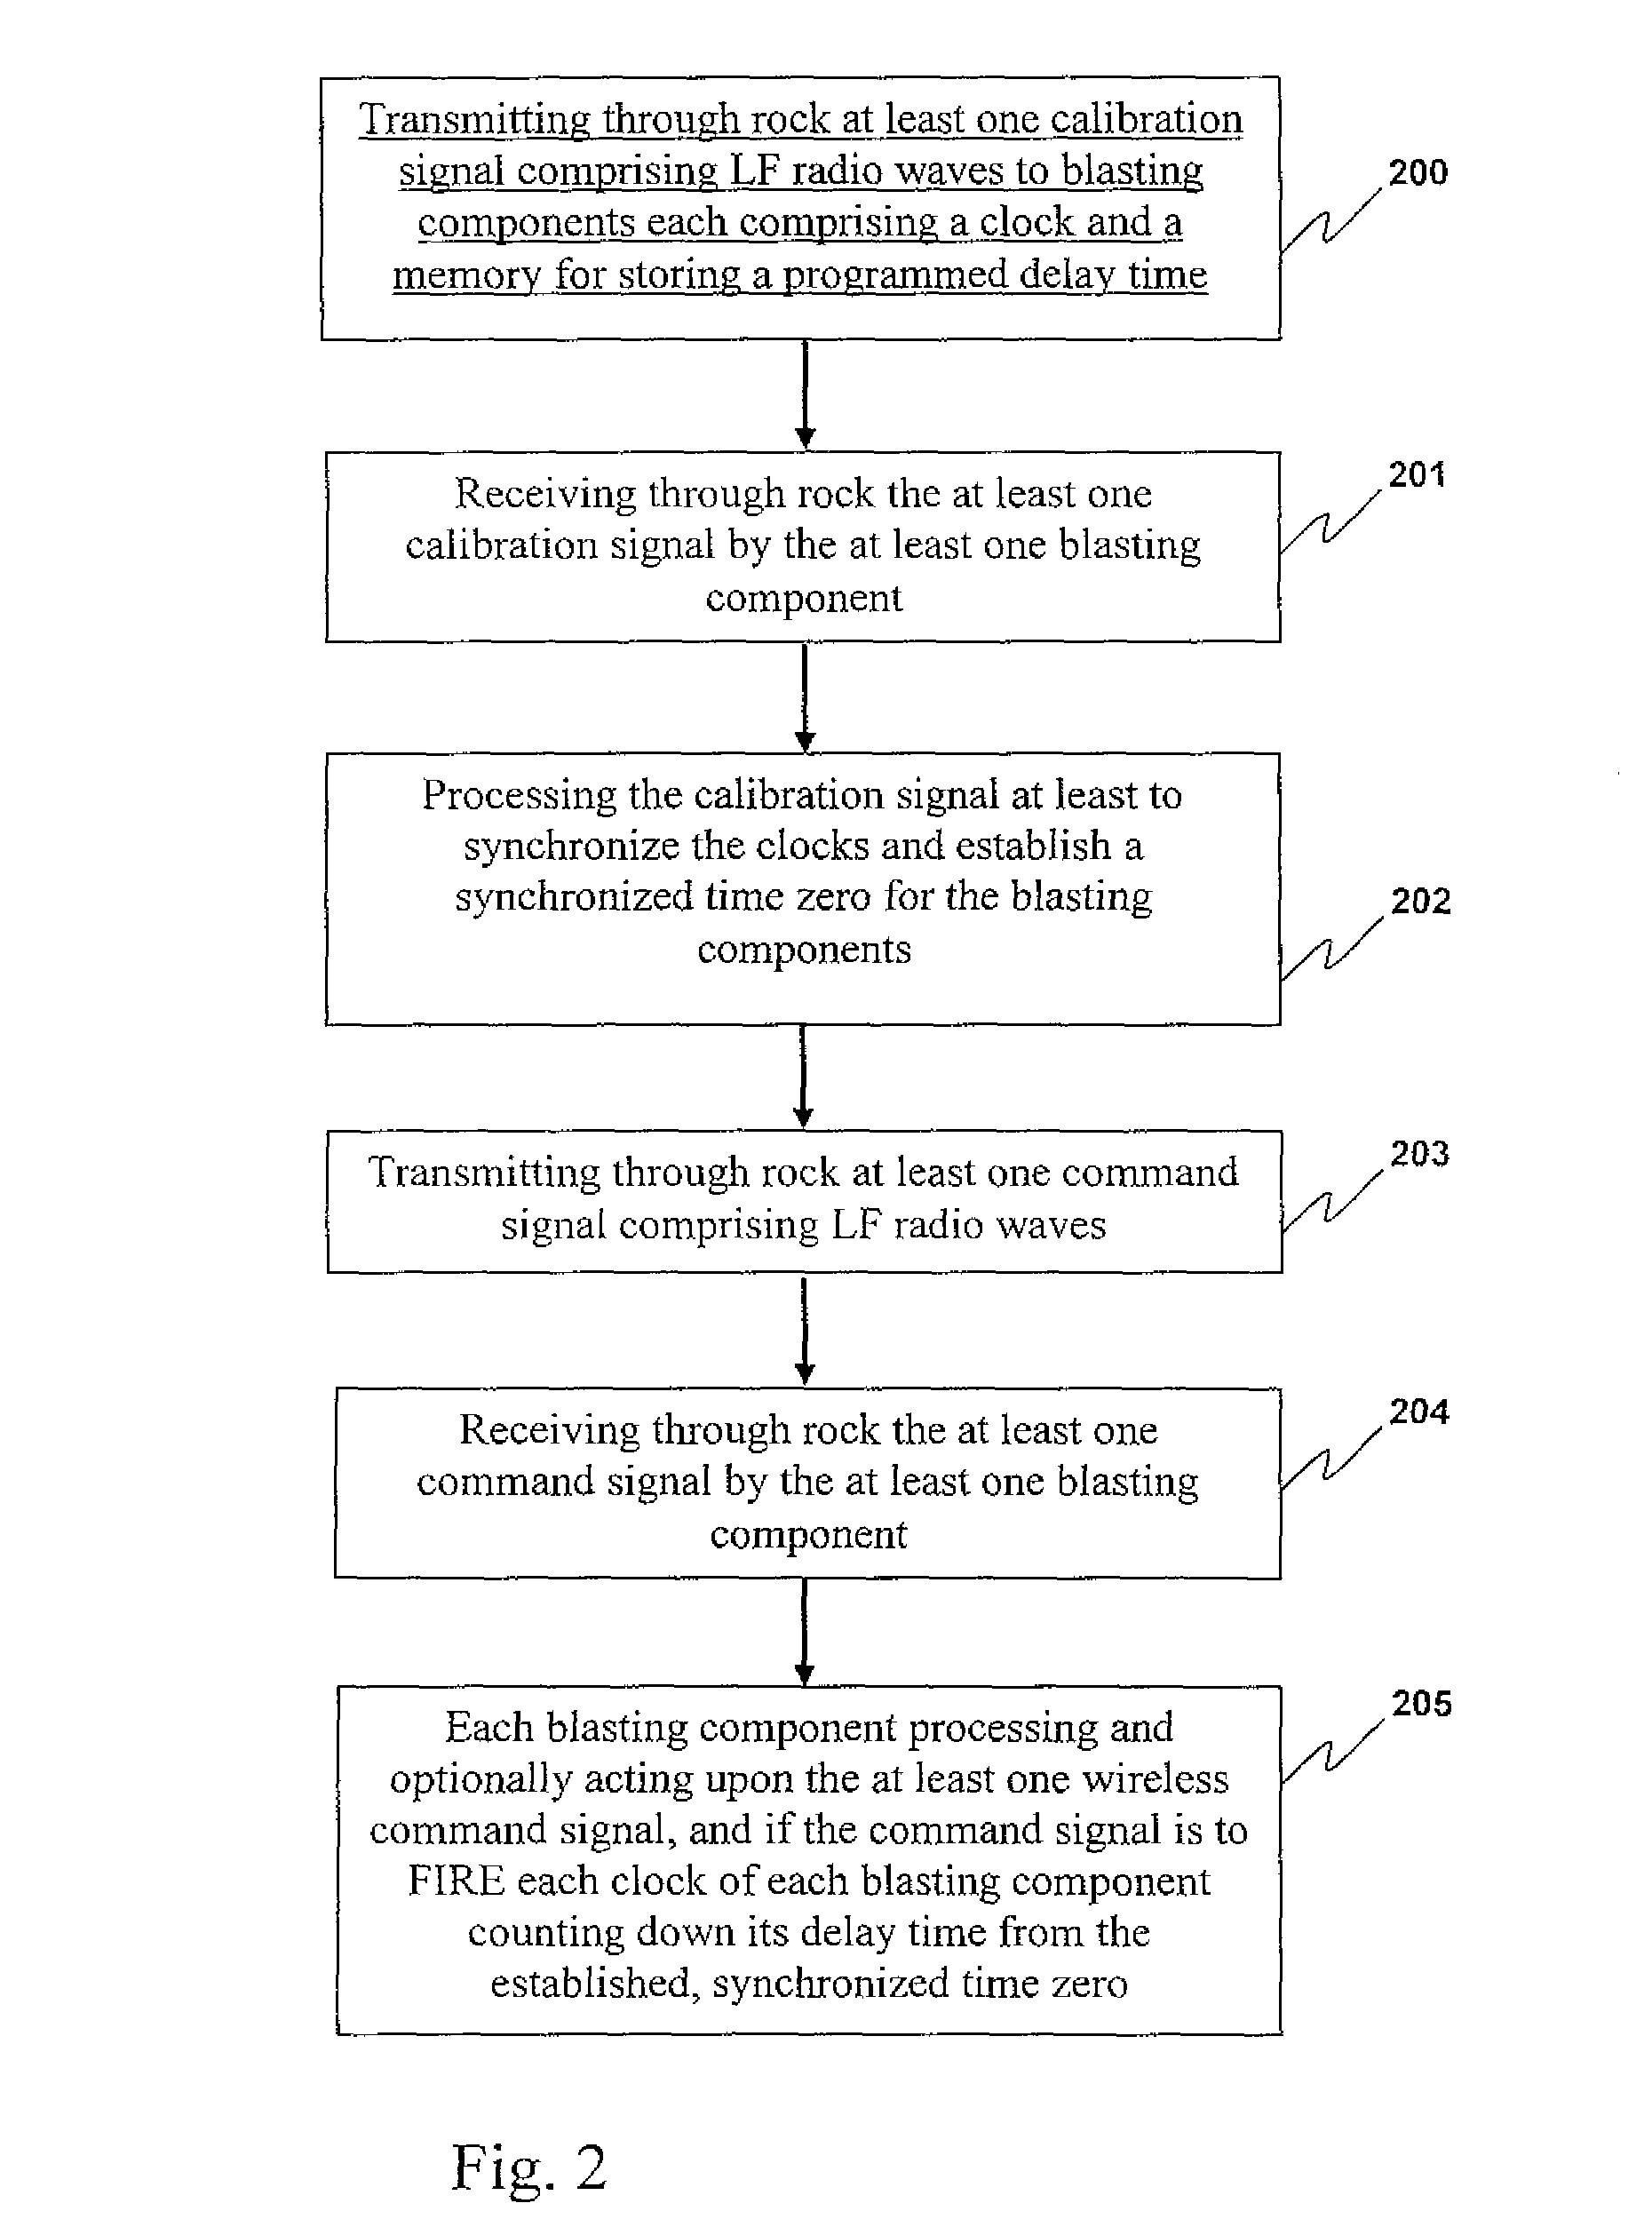 Methods of controlling components of blasting apparatuses, blasting apparatuses, and components thereof